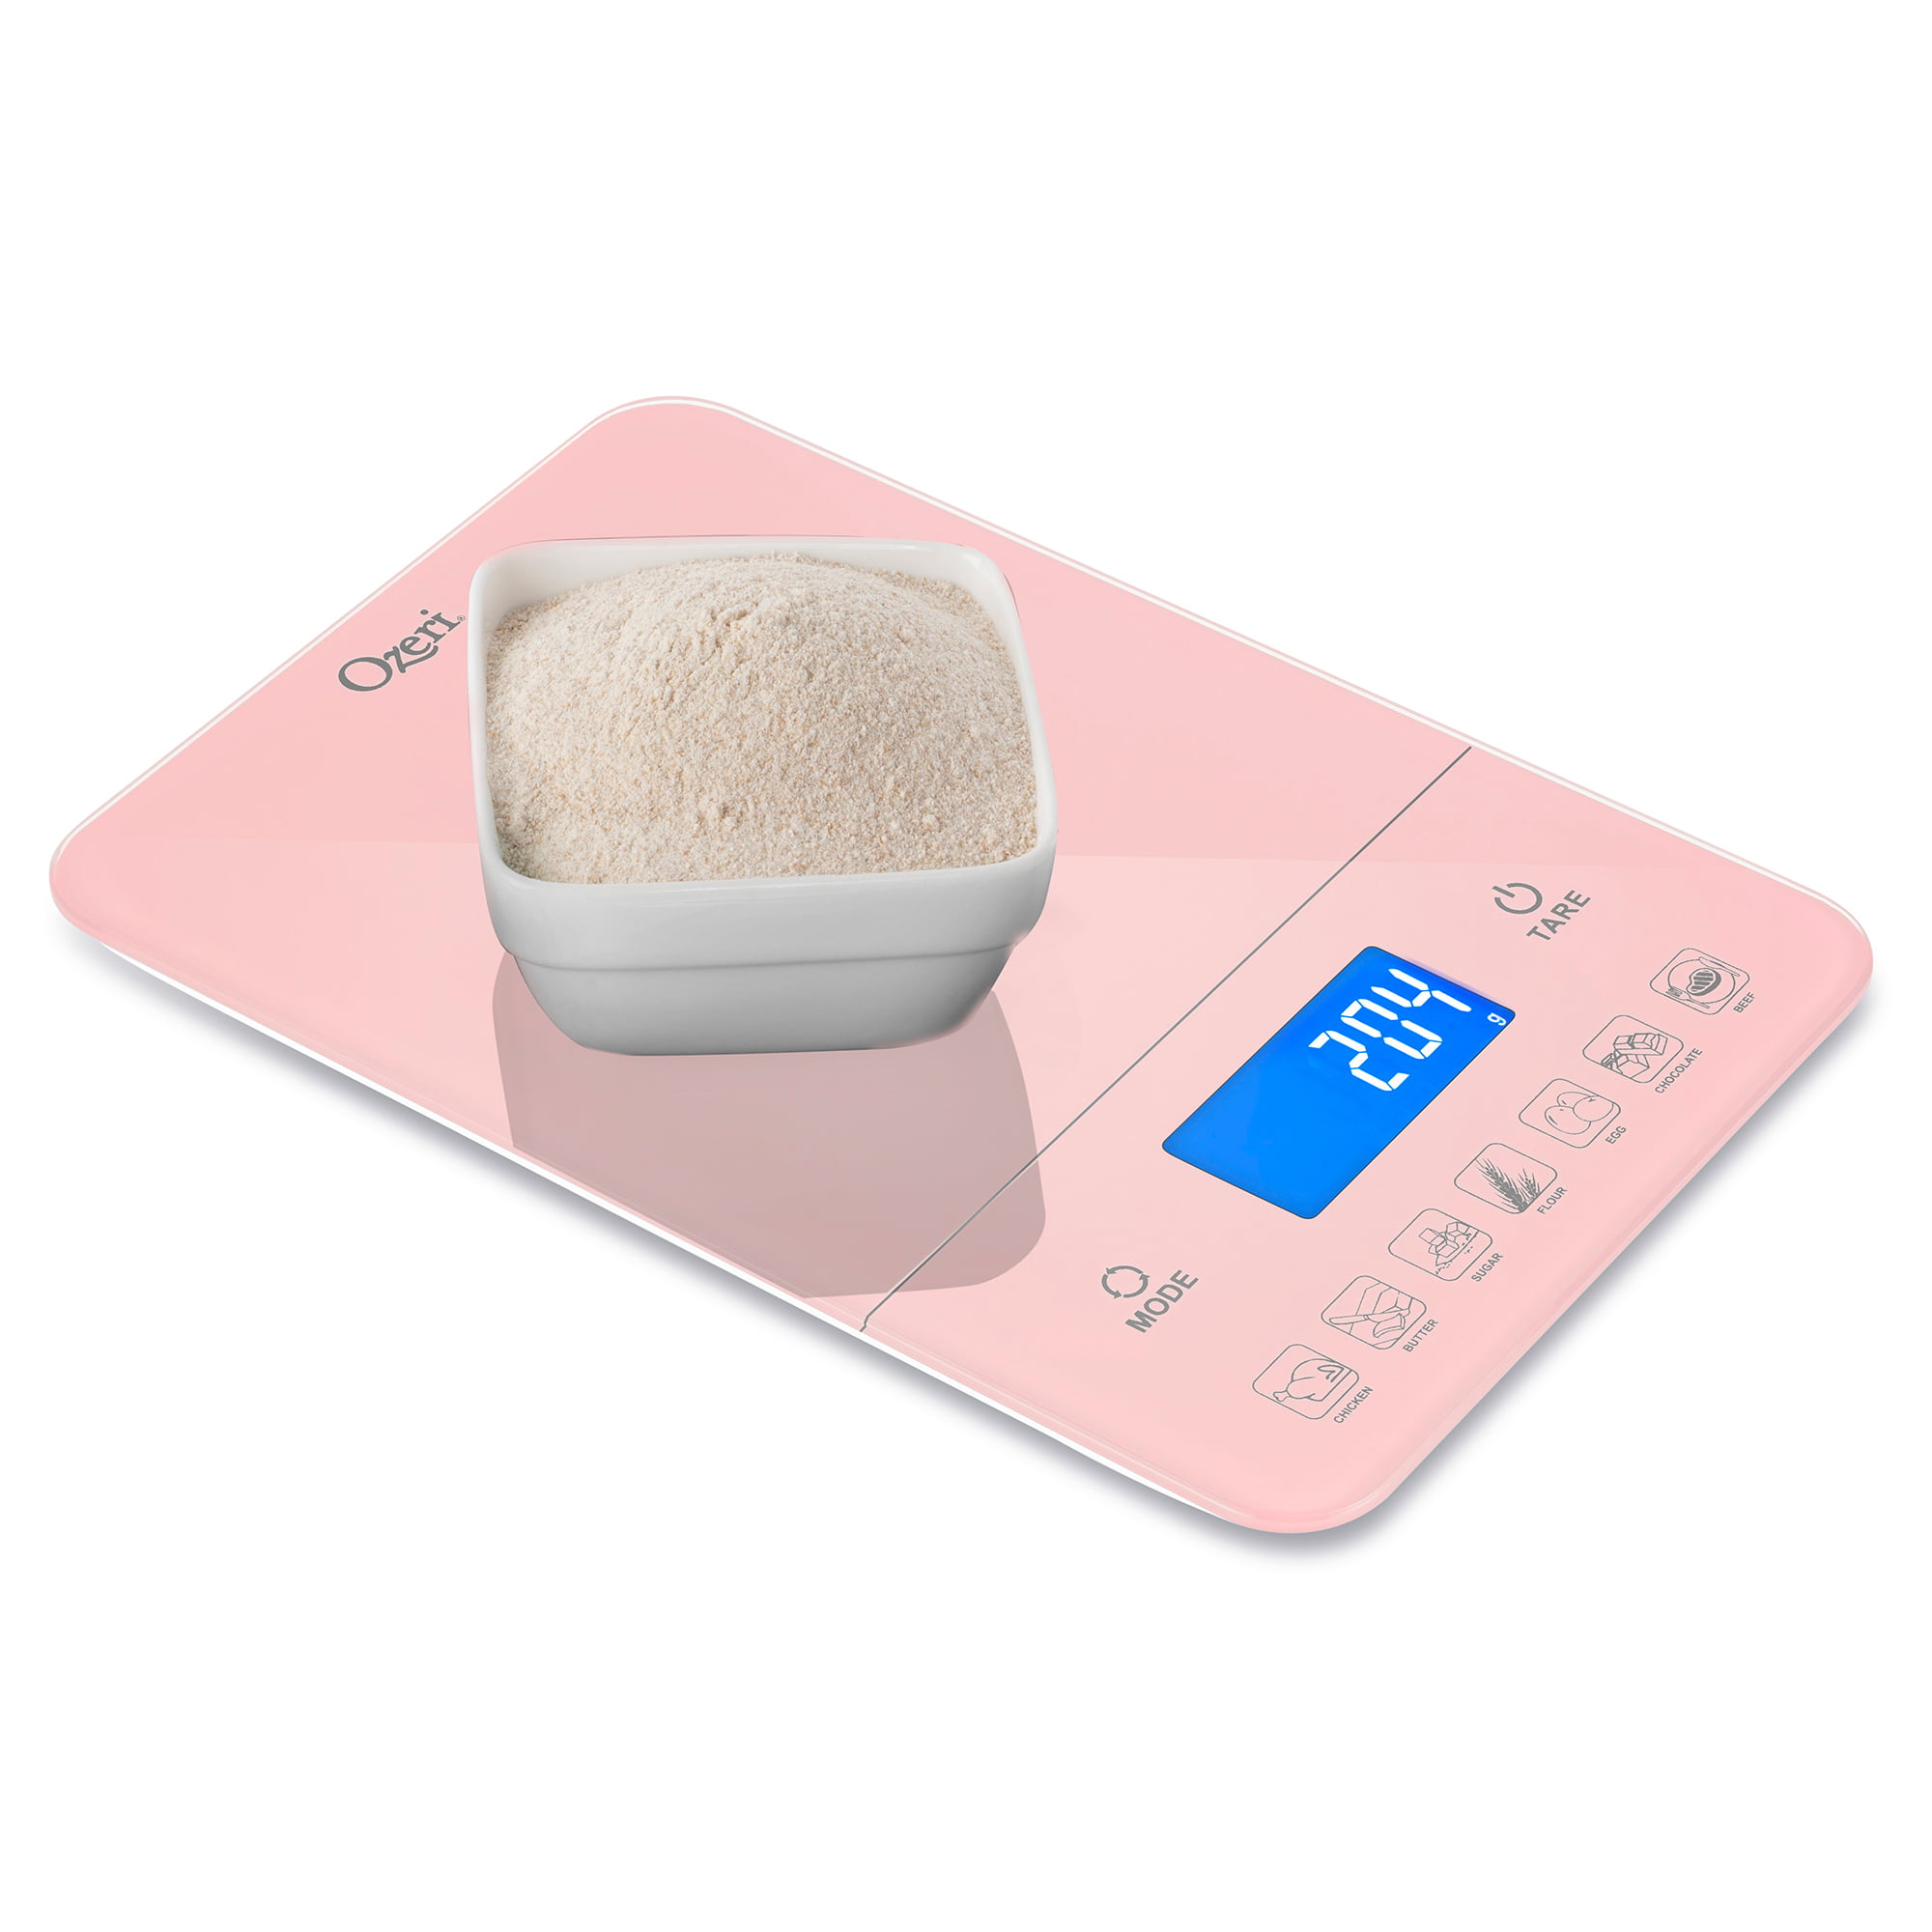 NEW】OZERI TOUCH III 22 LBS (10 KG) DIGITAL KITCHEN SCALE WITH CALORIE  COUNTER